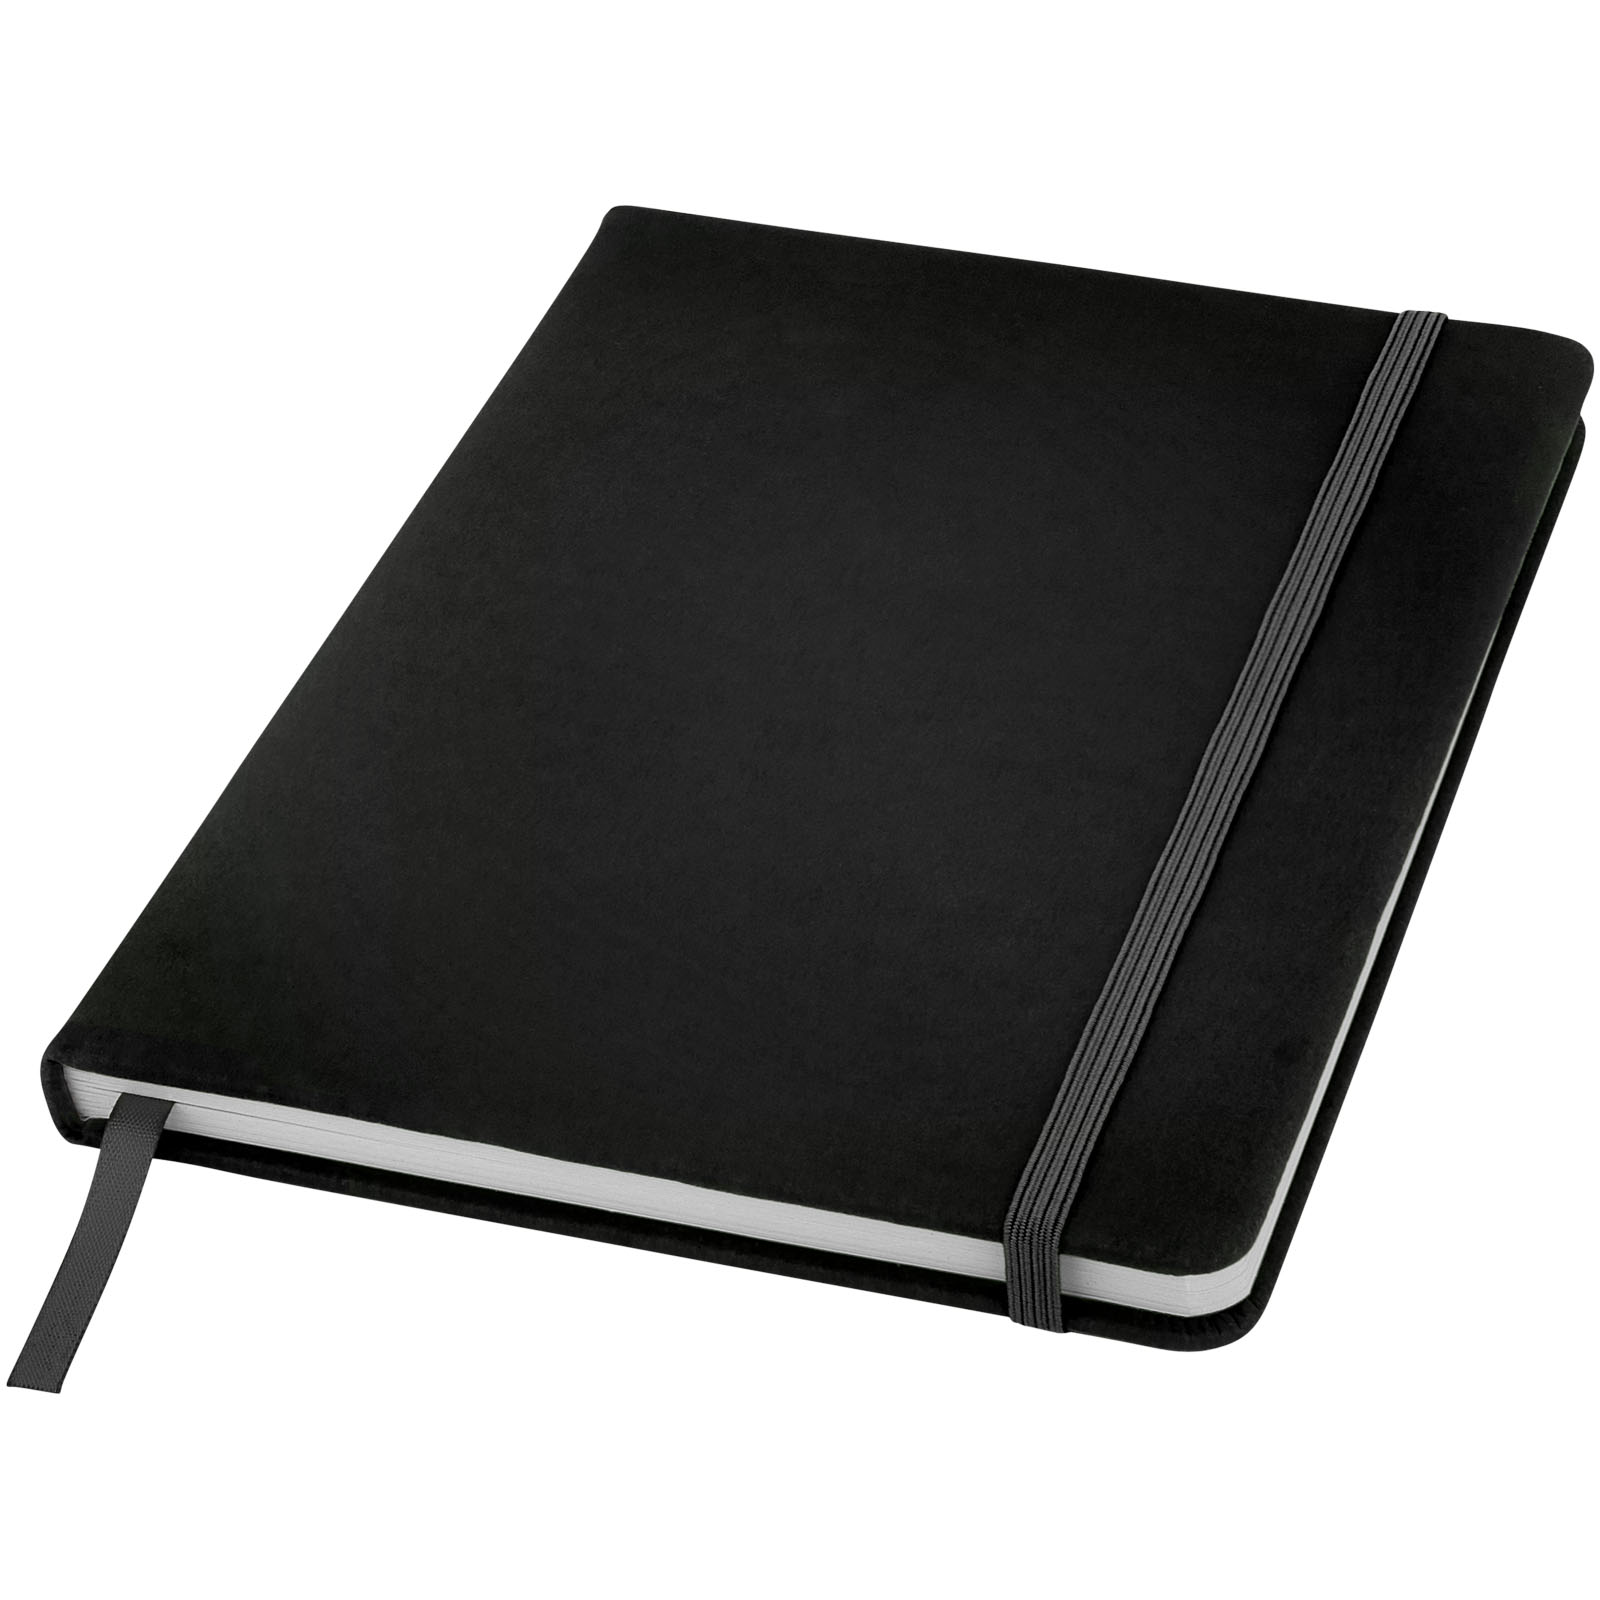 Advertising Hard cover notebooks - Spectrum A5 notebook with dotted pages - 0